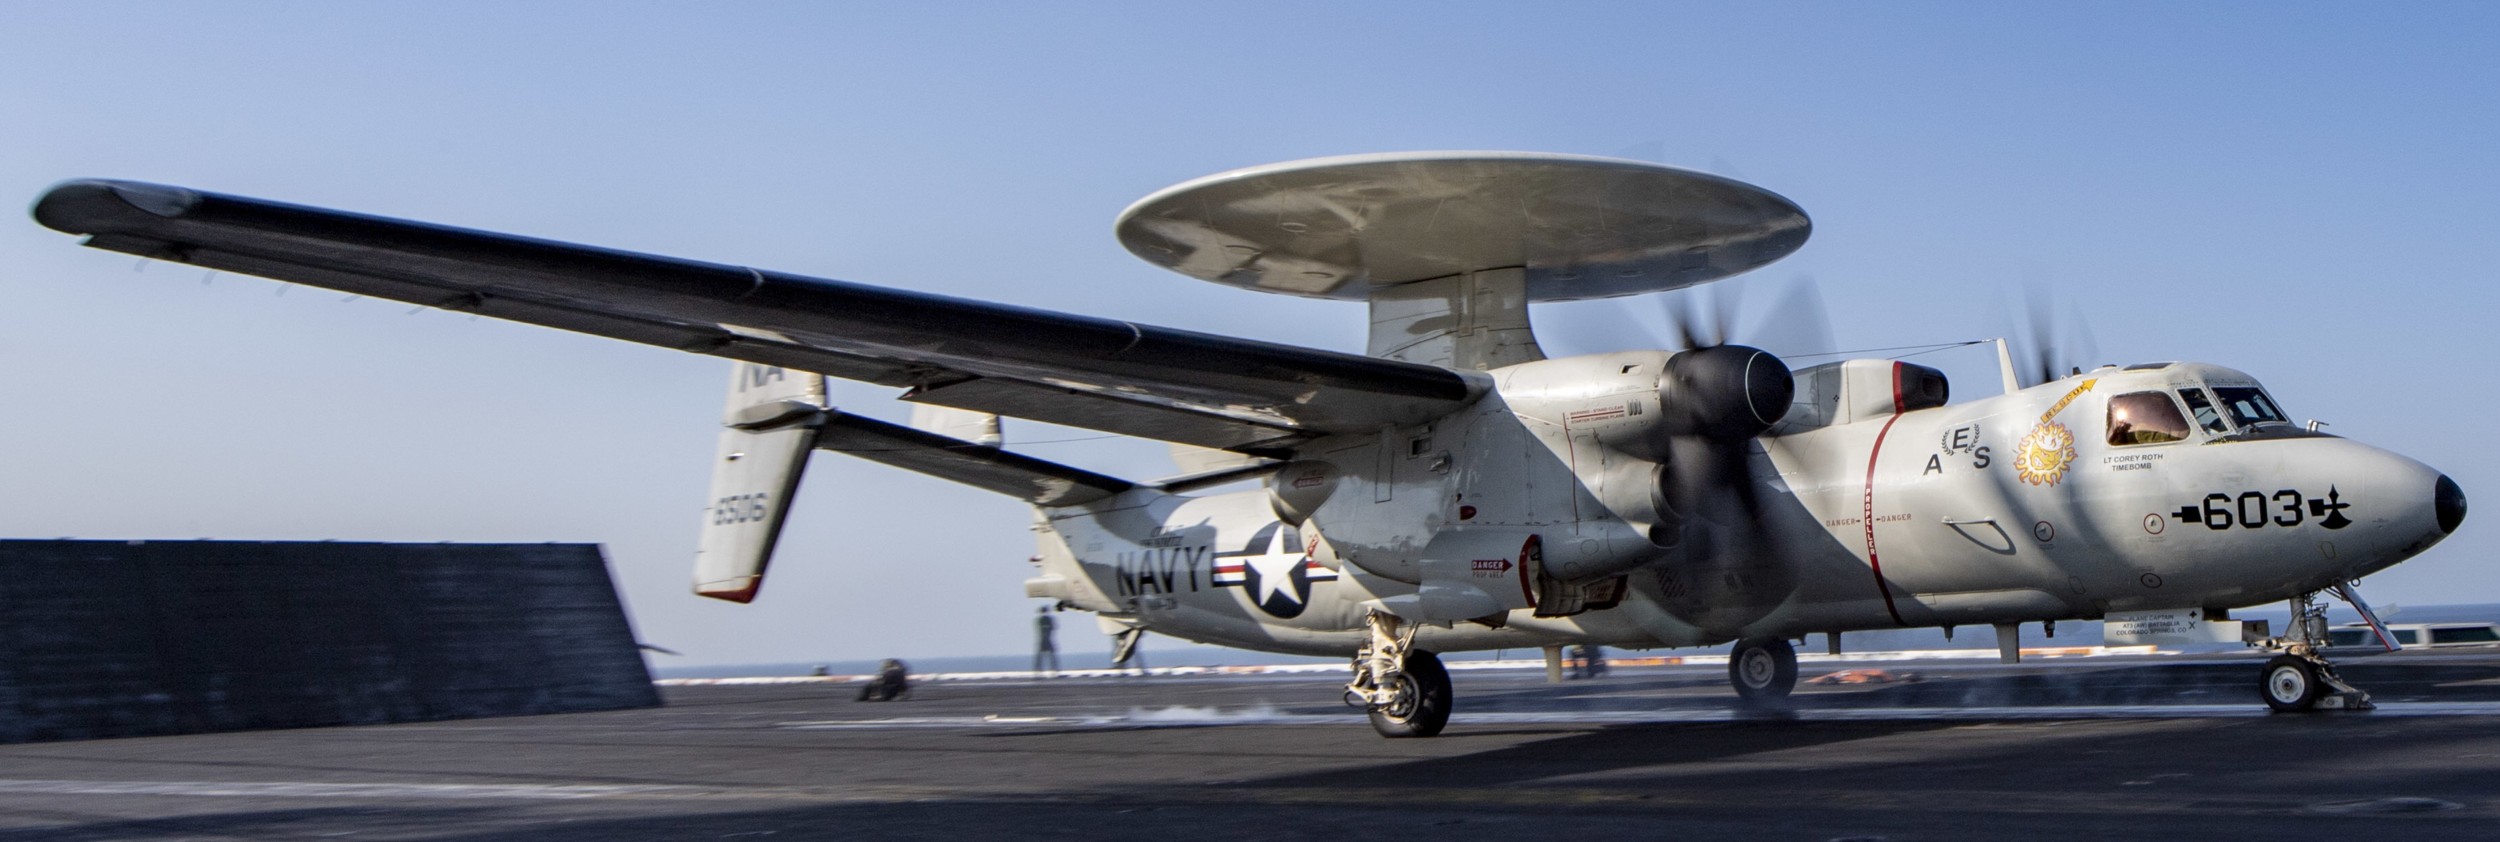 vaw-116 sun kings airborne command control squadron carrier early warning cvw-17 uss nimitz cvn-68 91